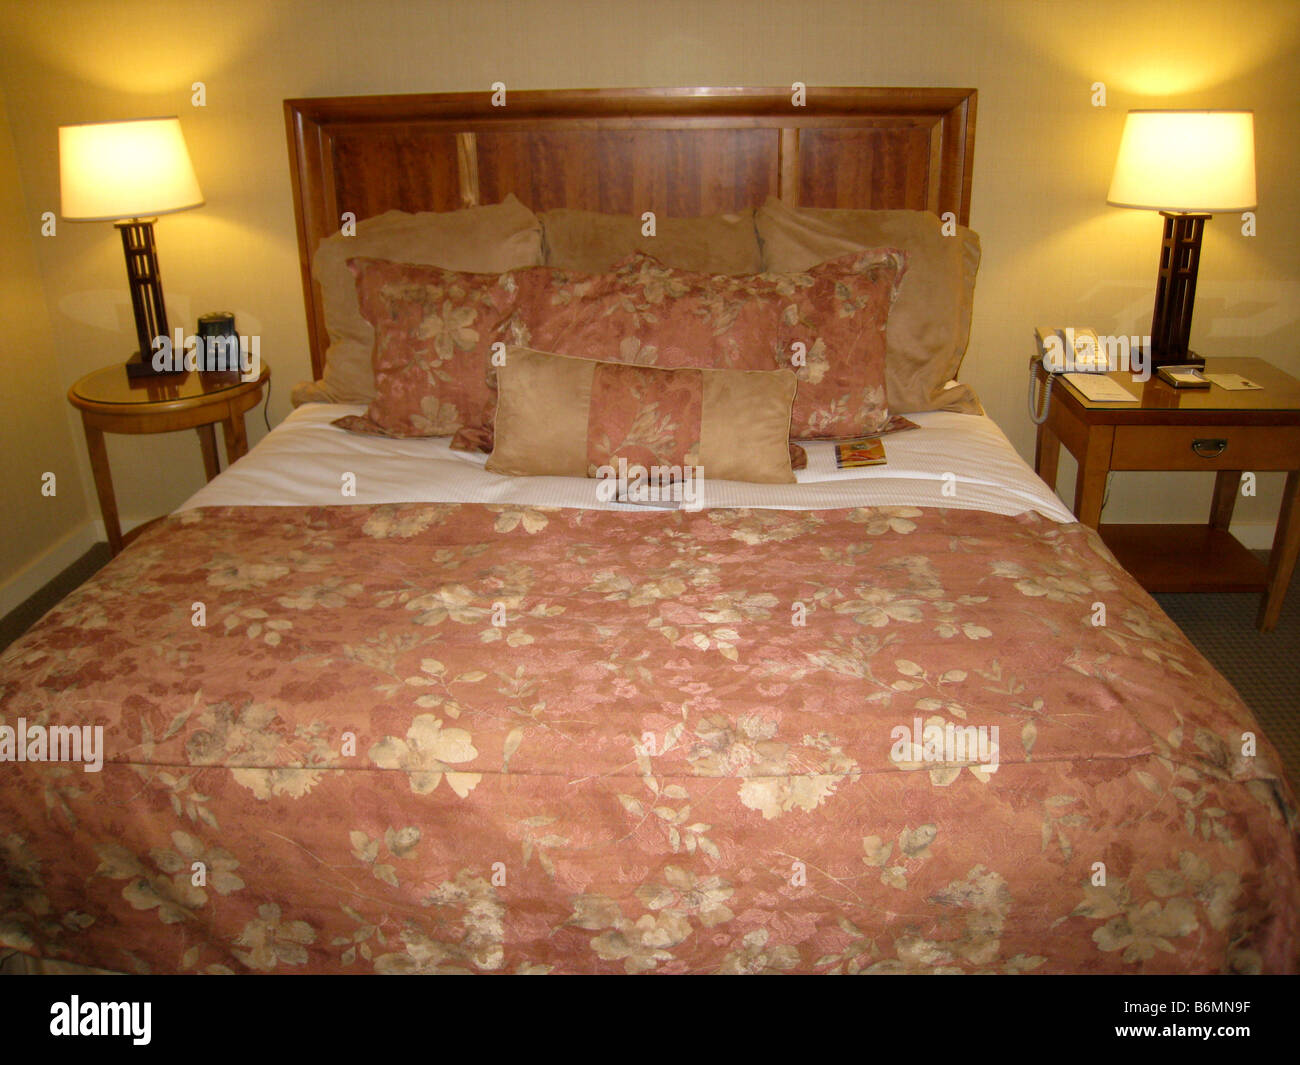 King Size Bed High Resolution Stock Photography and Images - Alamy